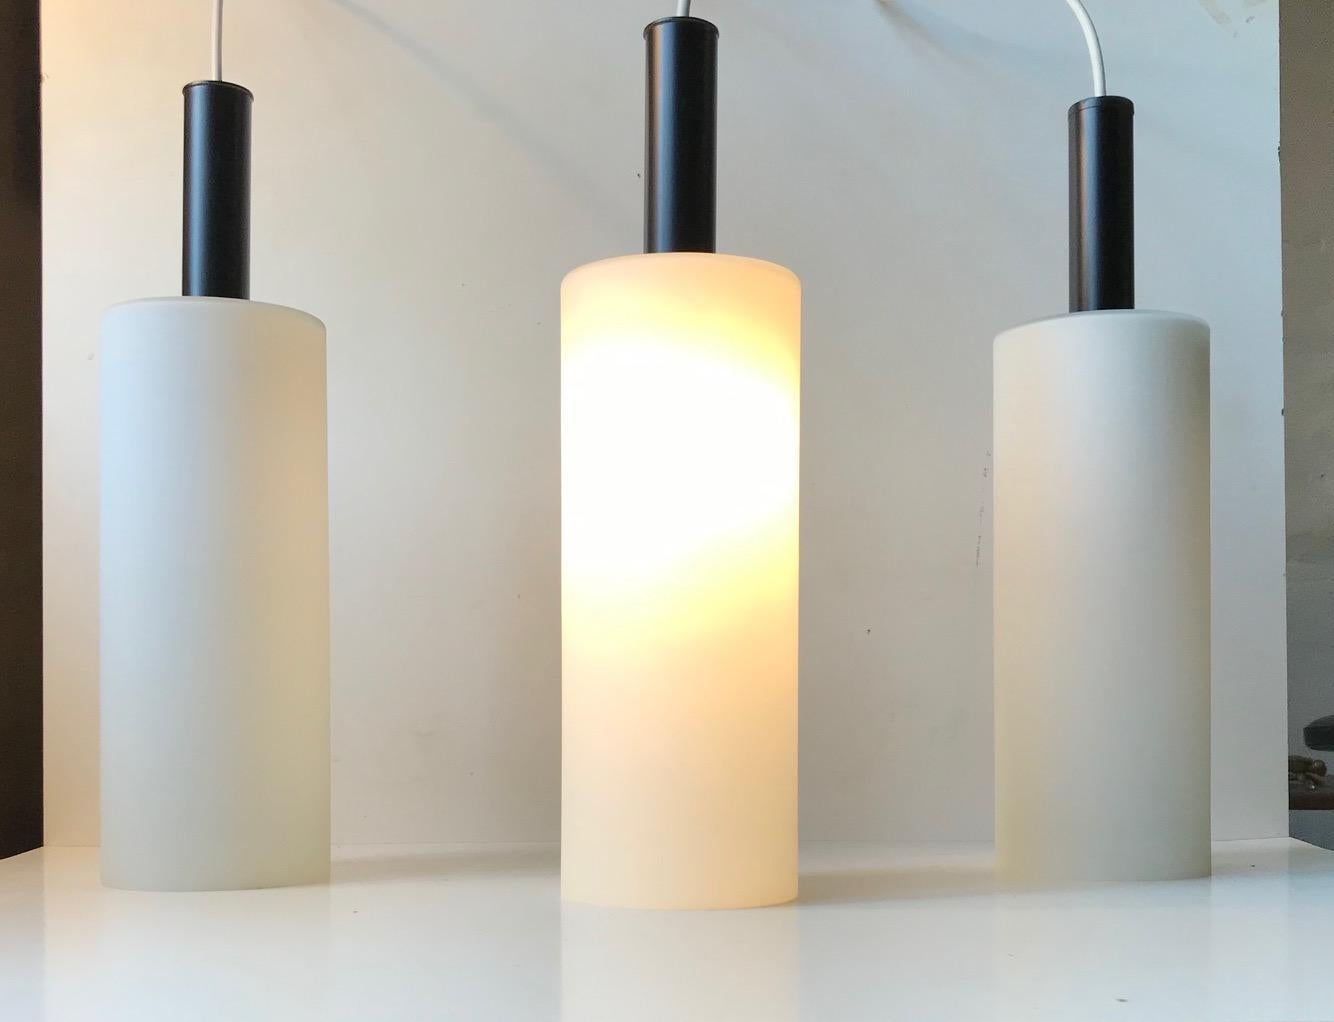 A trio of 'hammer' or 'mallet' shaped pendant lamps composed of matté cased opaline glass and top made from powder coated steel. Designed and manufactured by Lyfa in Denmark during the 1970s in a style reminiscent of Stilnovo.